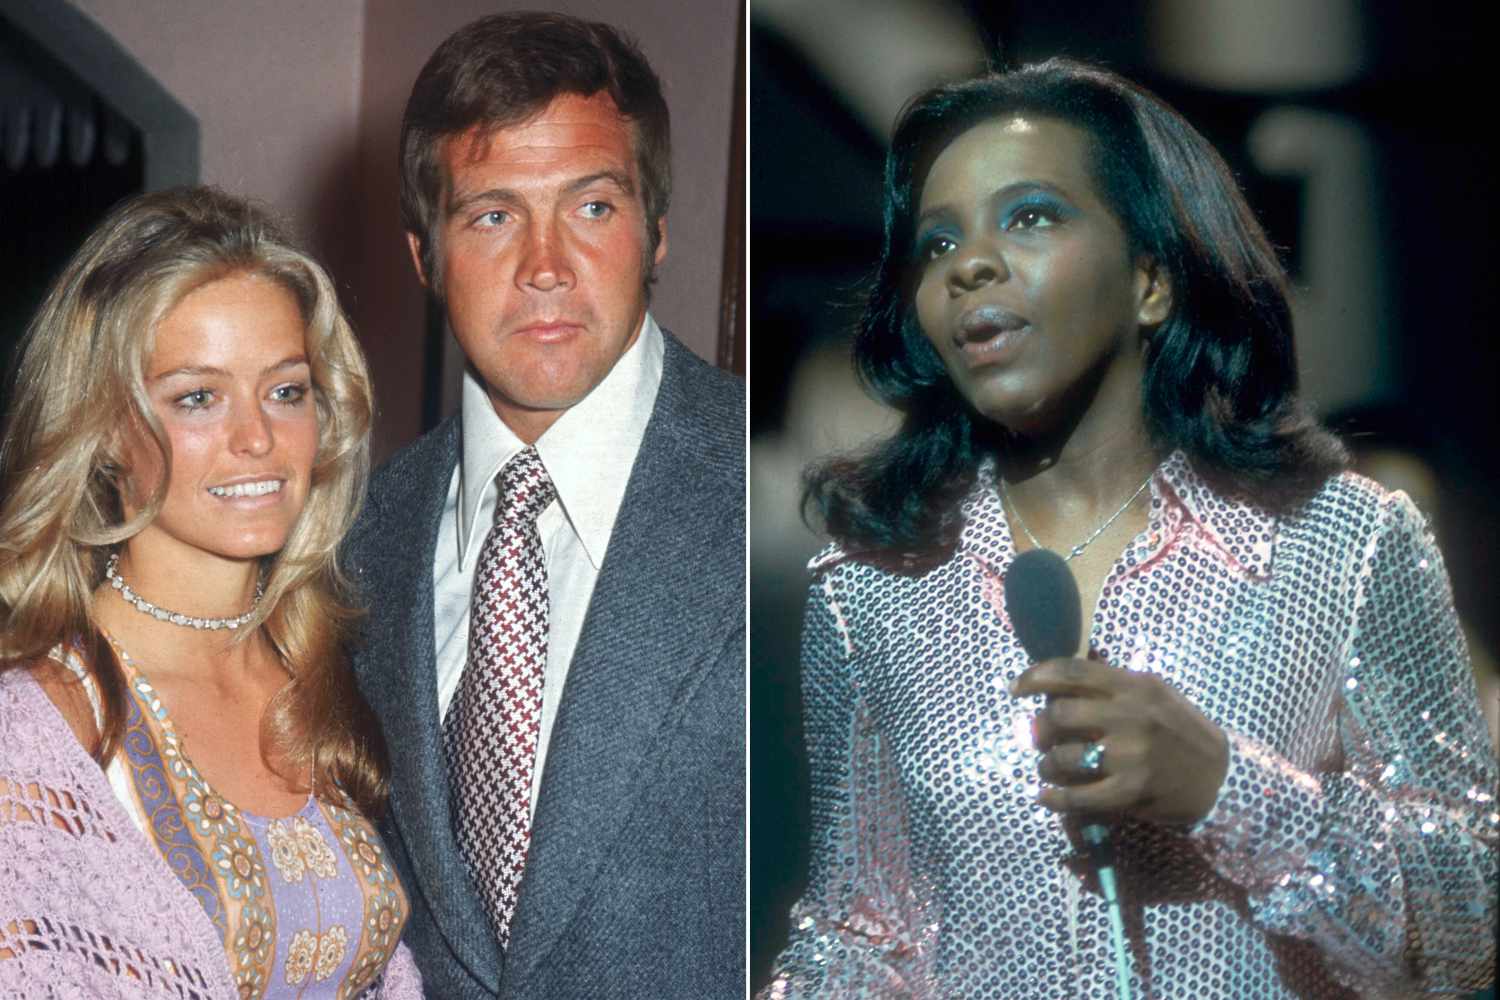 How Lee Majors and Farrah Fawcett Inspired the Hit Song 'Midnight Train to Georgia' (Exclusive)